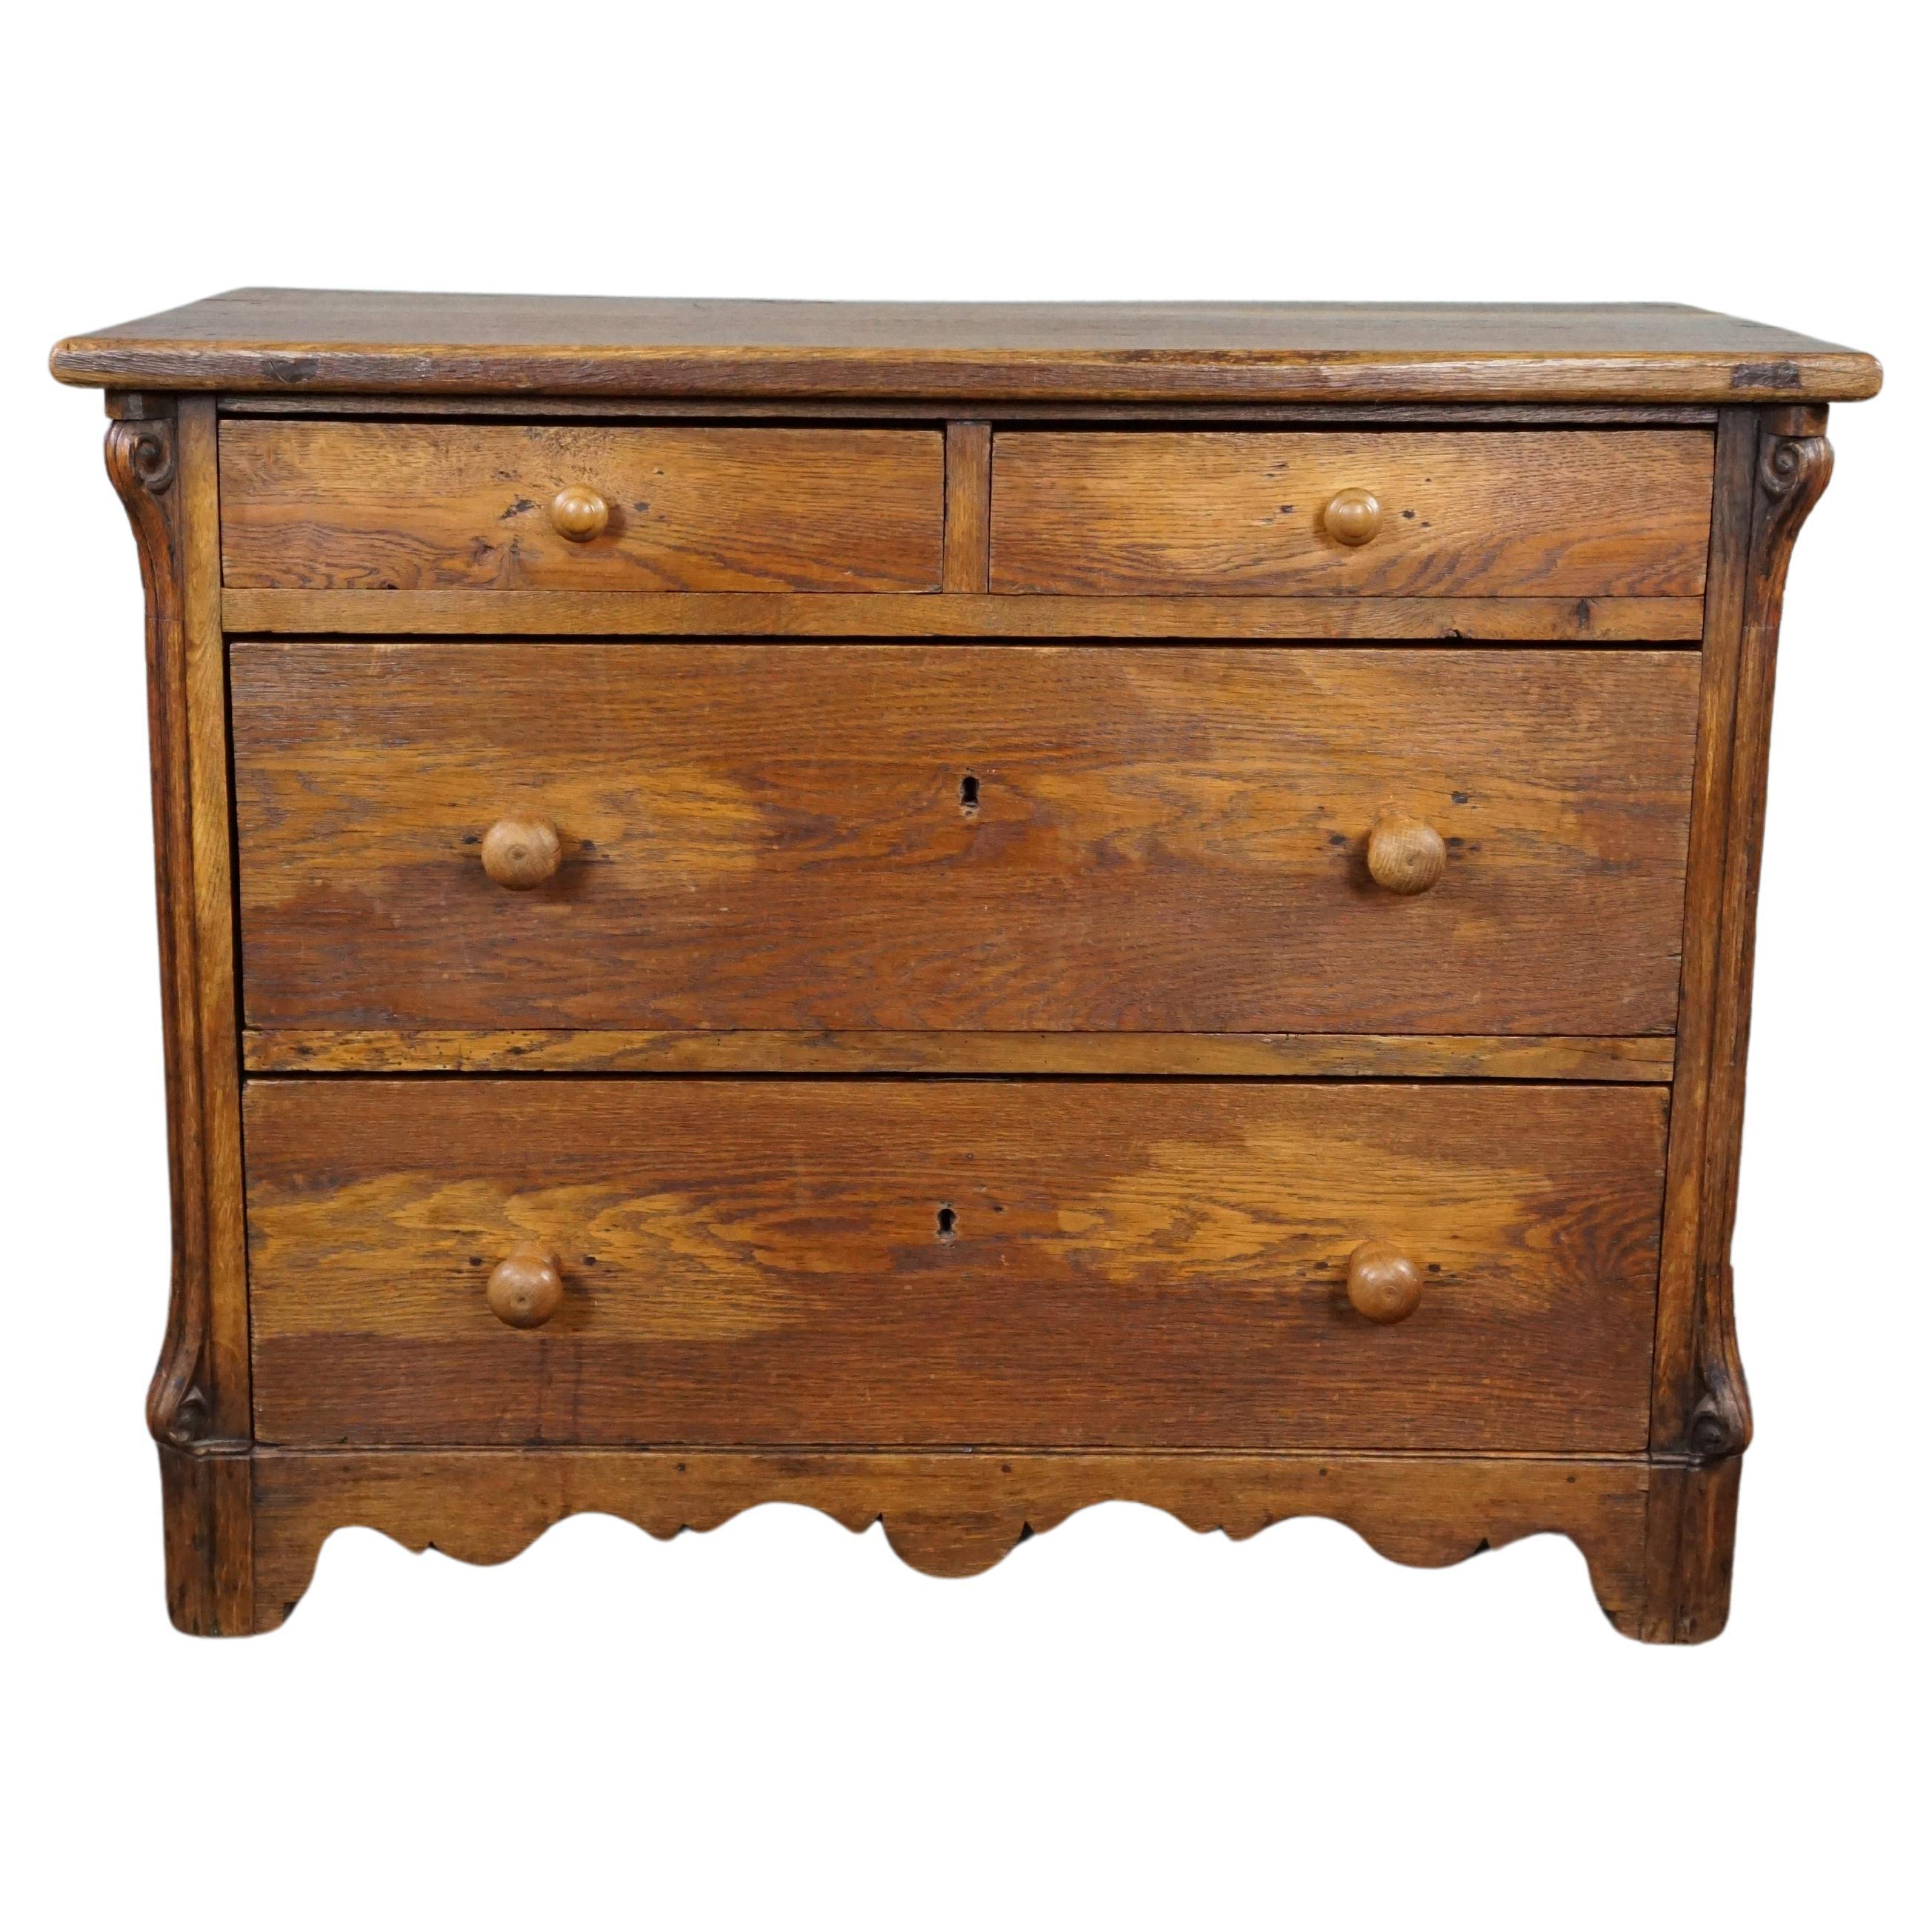 Beautiful antique oak chest of drawers with 4 drawers and a striking appearance For Sale